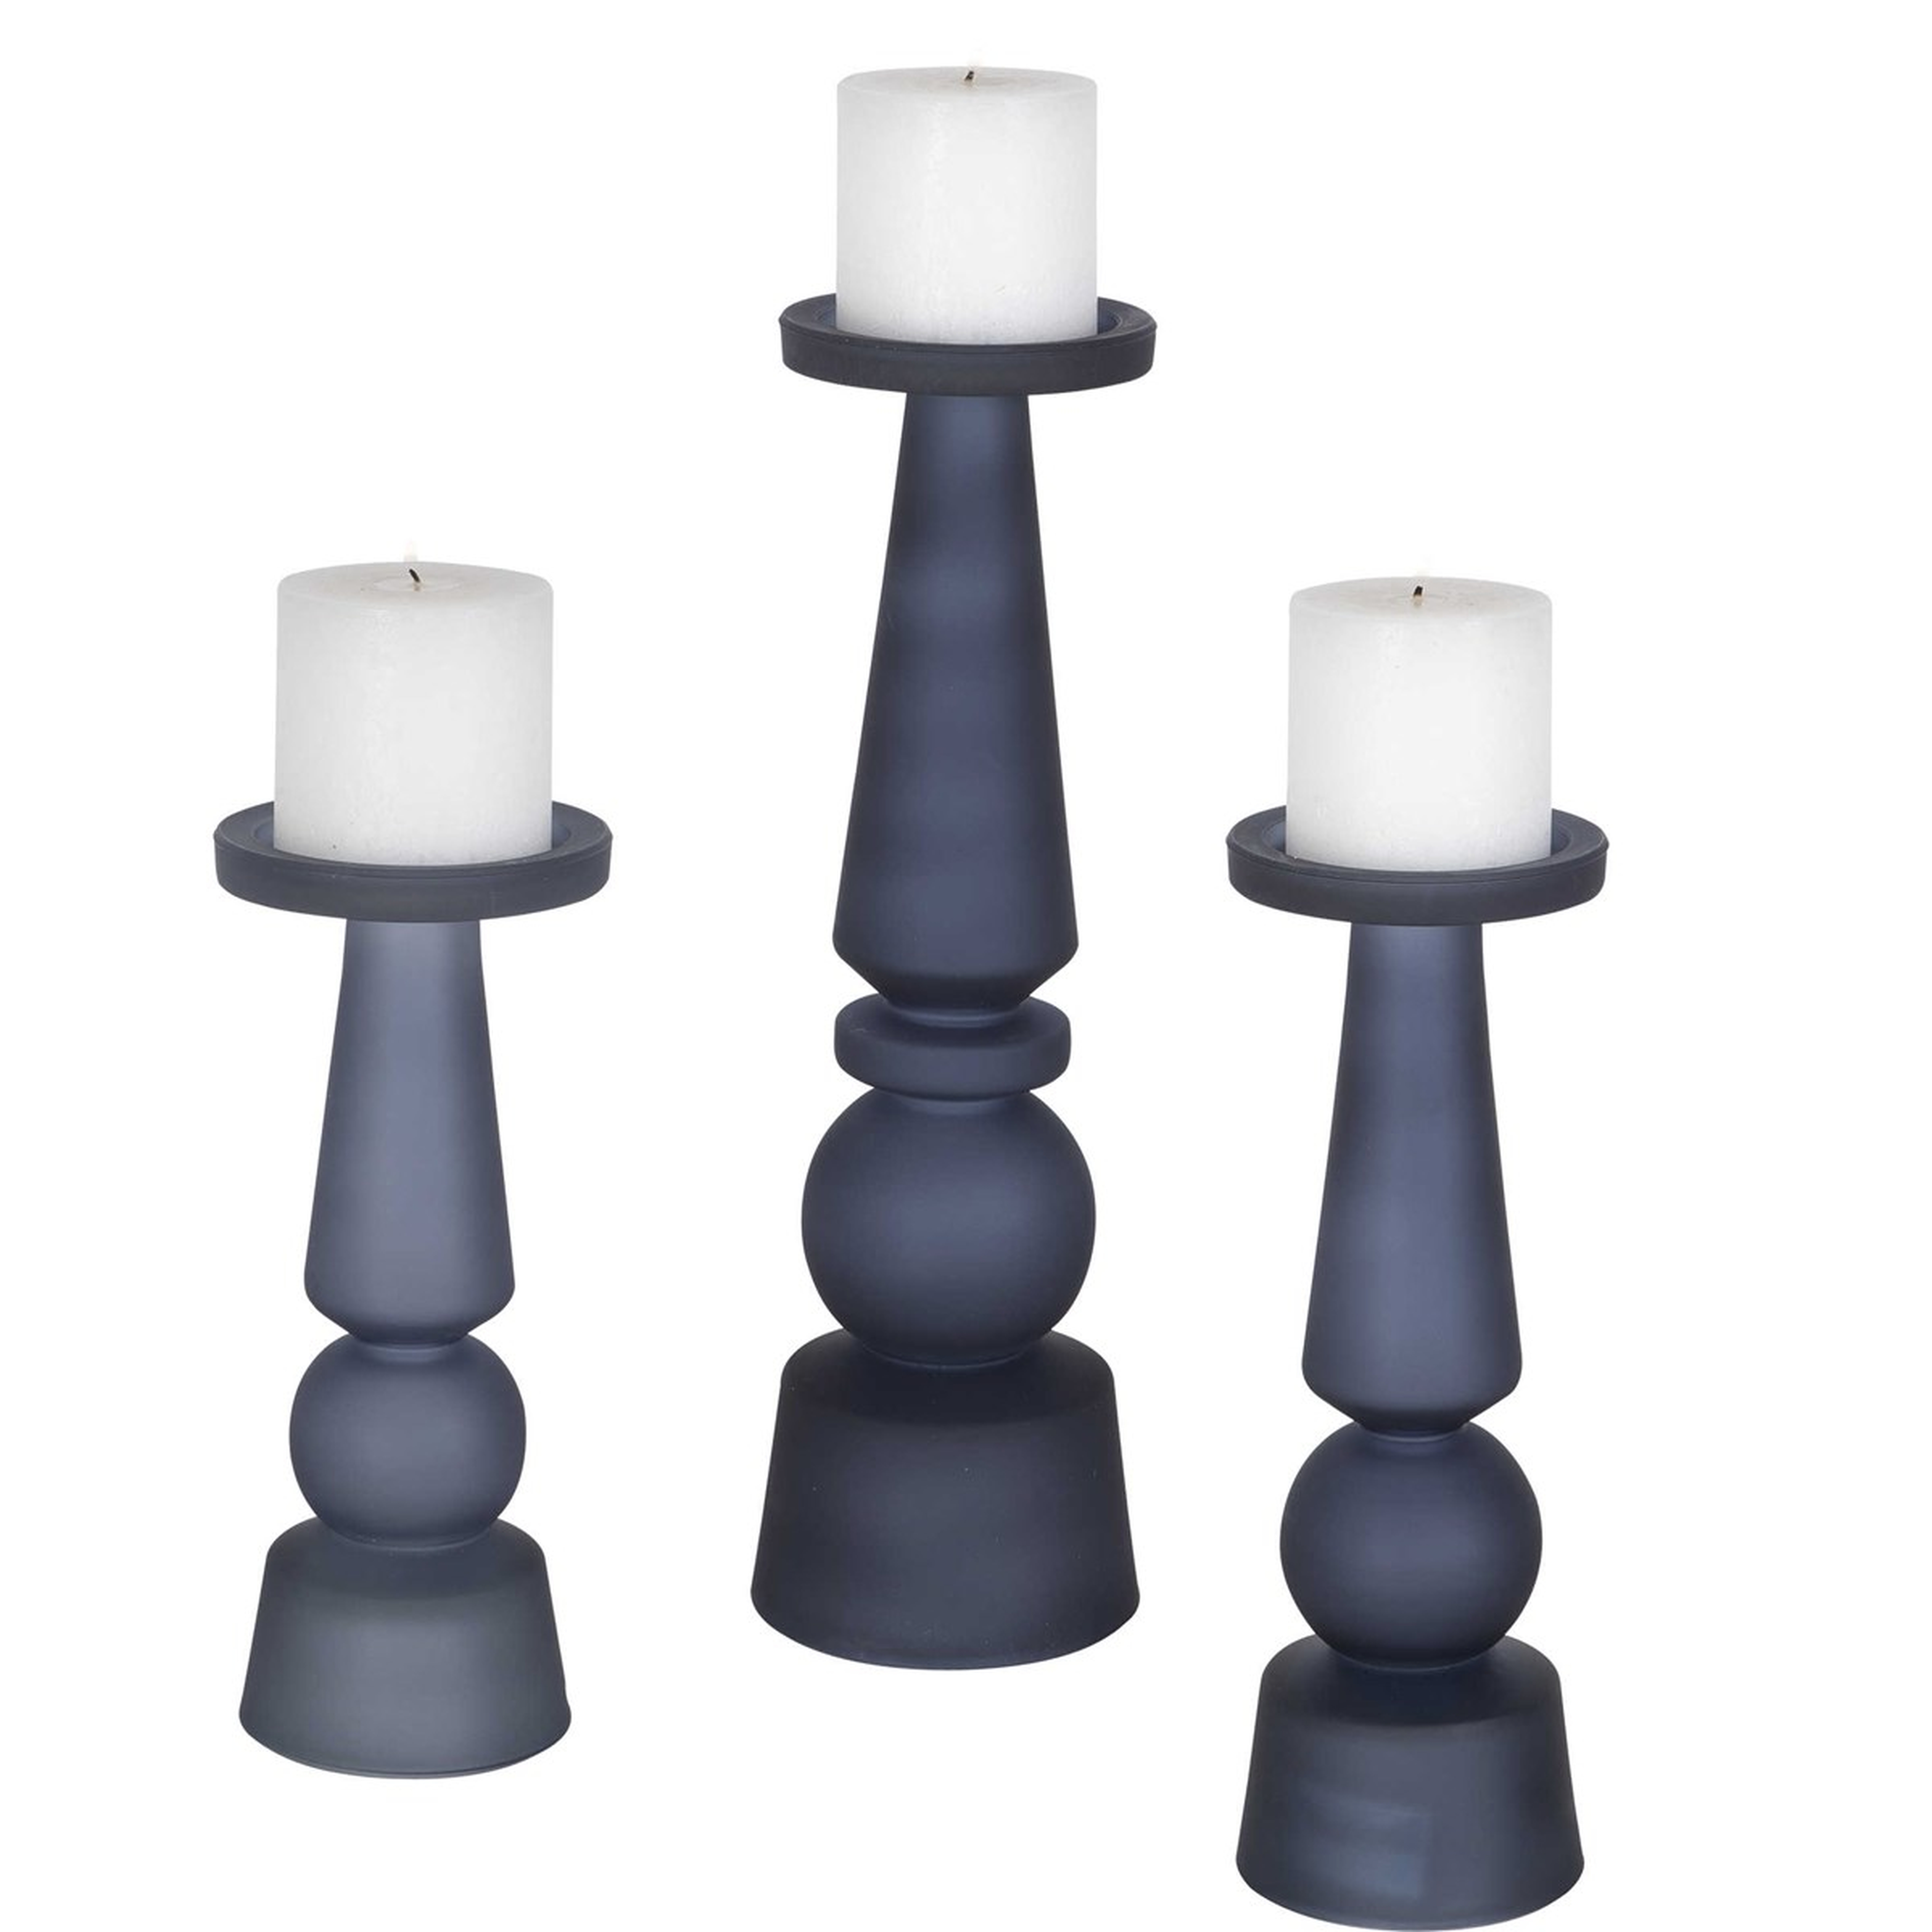 Cassiopeia Blue Glass Candleholders, Set of 3 - Hudsonhill Foundry